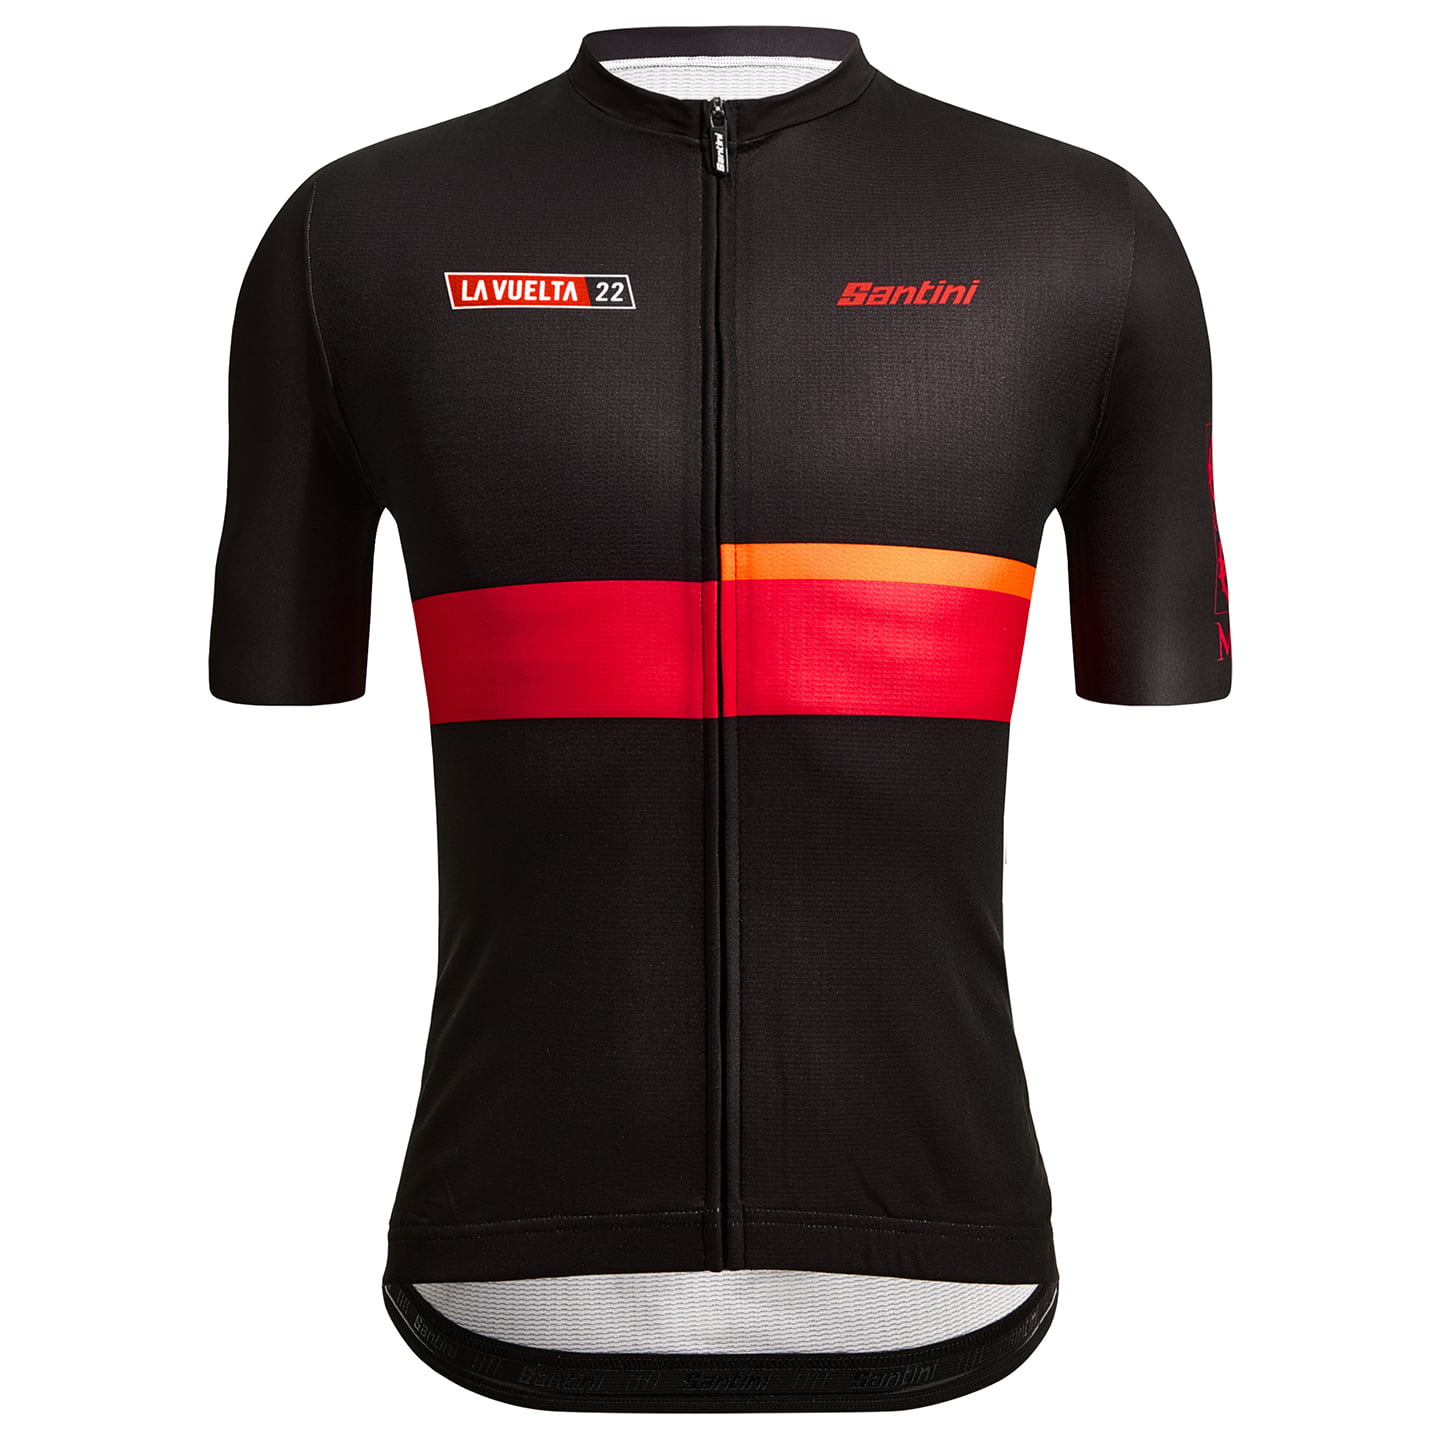 LA VUELTA Madrid 2022 Short Sleeve Jersey, for men, size S, Cycling jersey, Cycling clothing